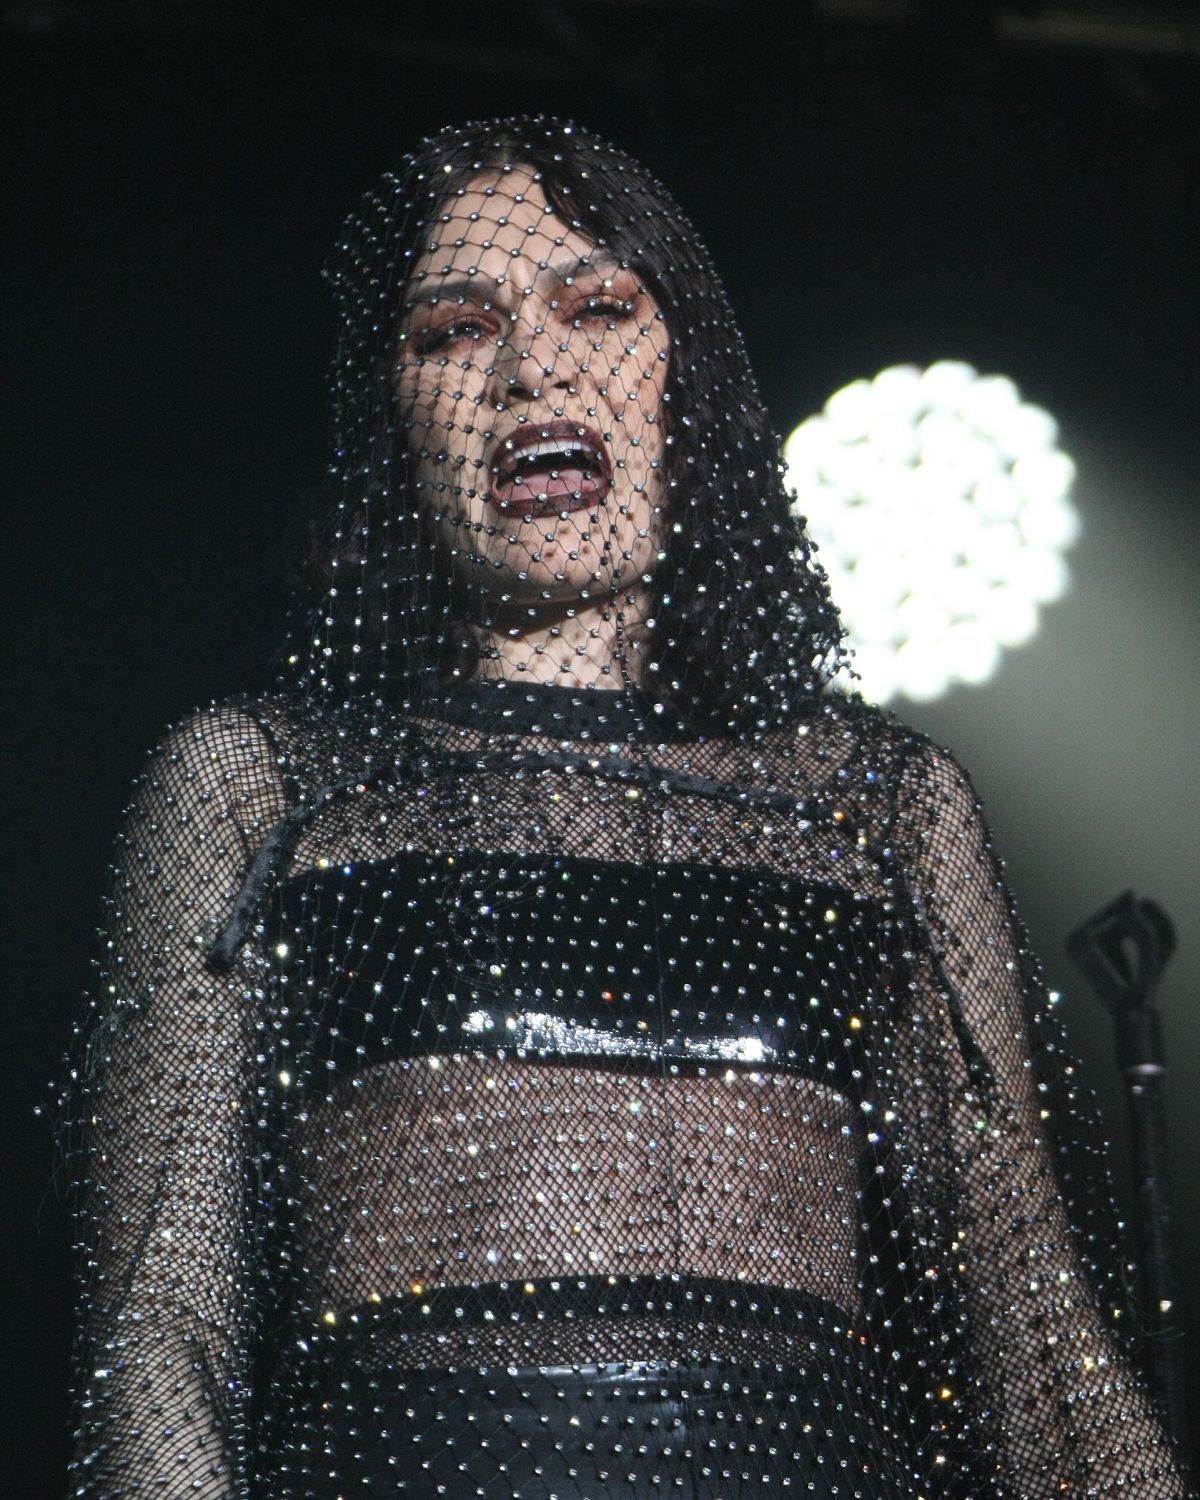 jessie-j-performs-at-national-boxing-stadium-in-dublin-12-01-2018-4.jpg